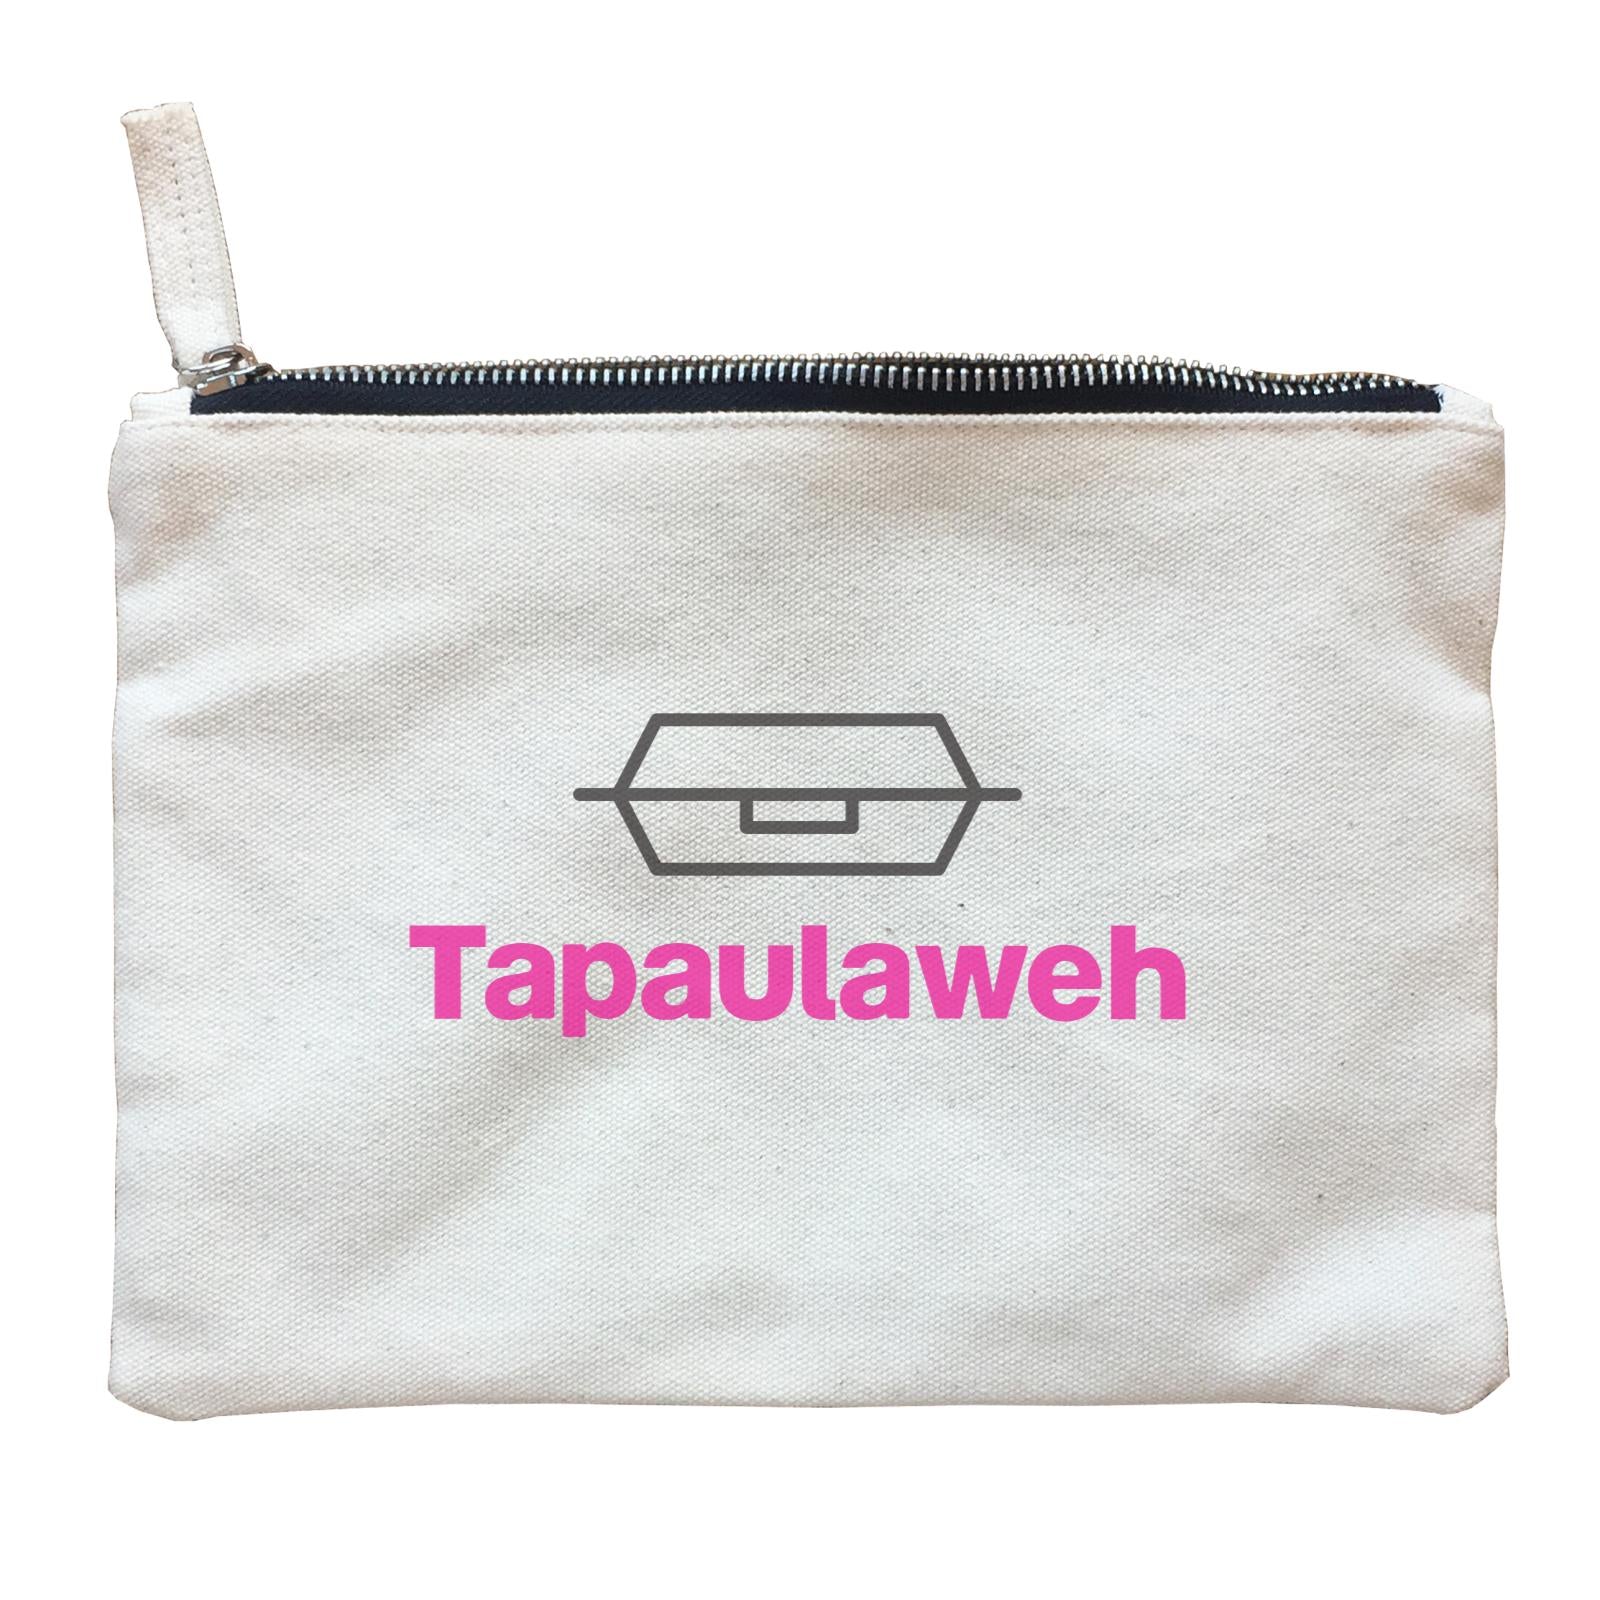 Slang Statement Tapaulaweh Accessories Zipper Pouch